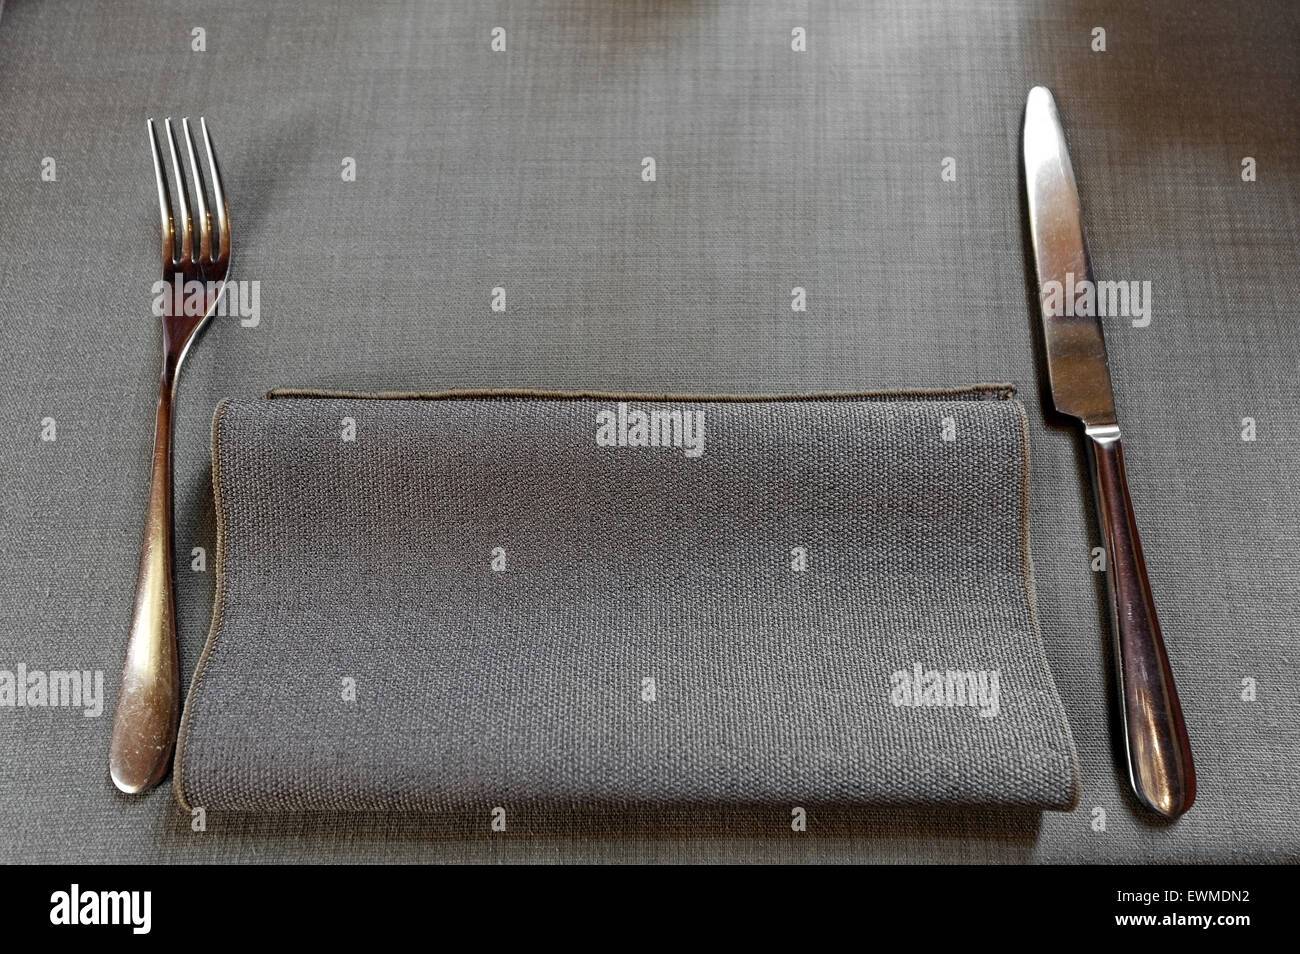 Dinner setting in a restaurant with a napkin, a fork and a knife Stock Photo